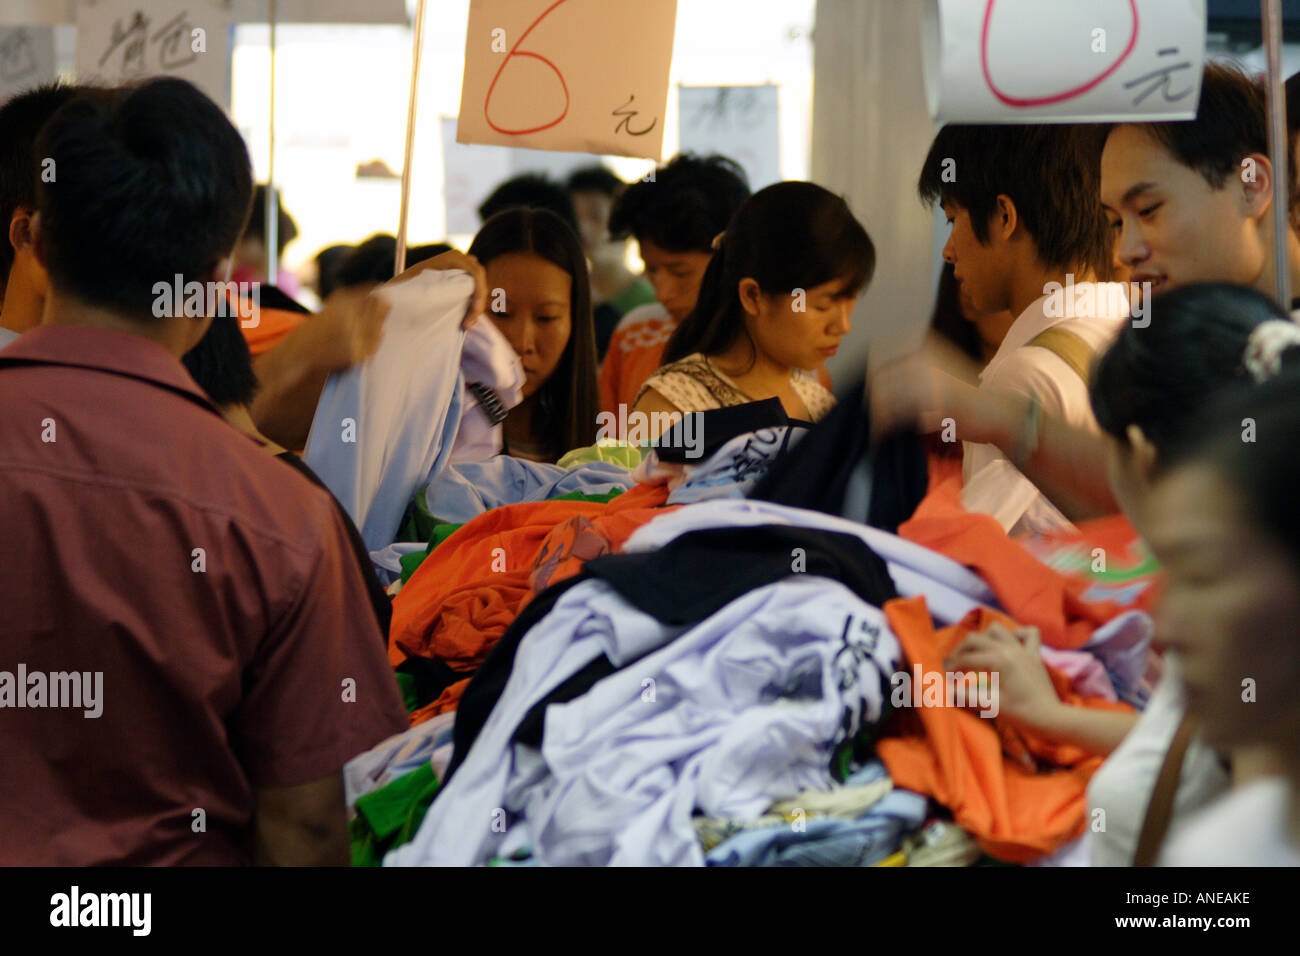 A Crowd of Chinese Shoppers Aggressively Digging Through Clothes in a Sale  Bin, Guangzhou, China Stock Photo